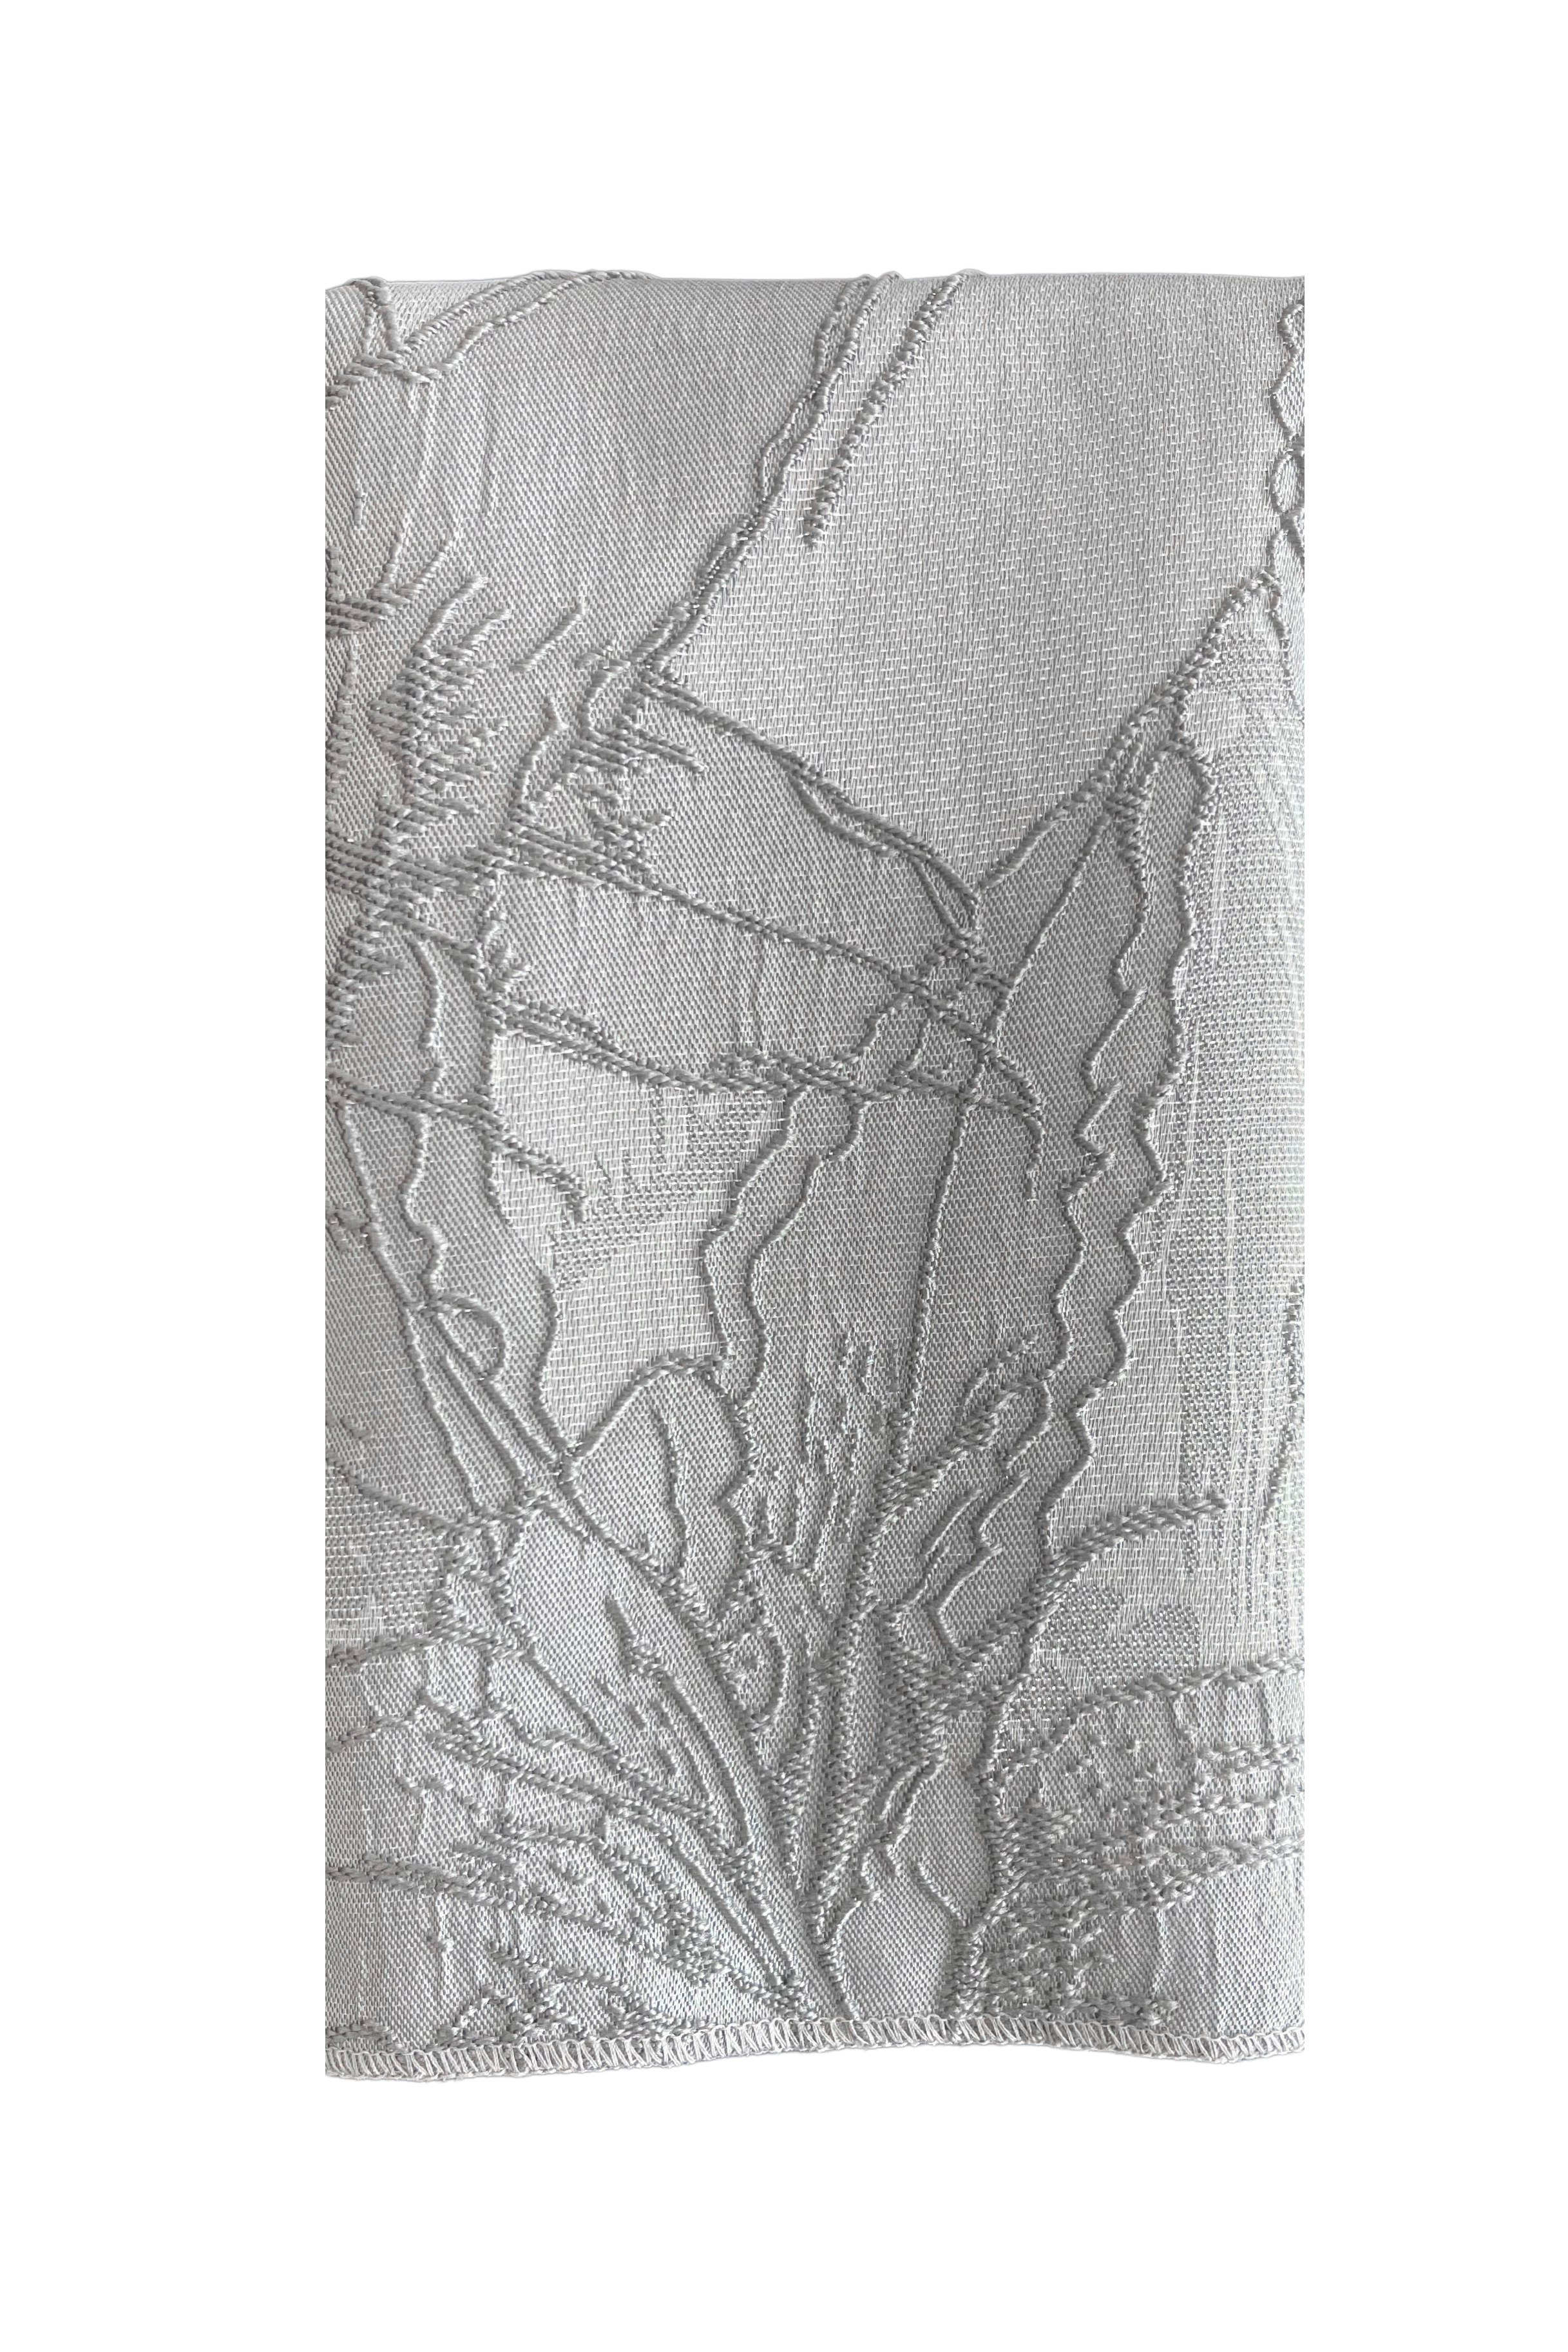 Grey Fabric Napkin with a lily floral embroidery pattern in metallic stitching 